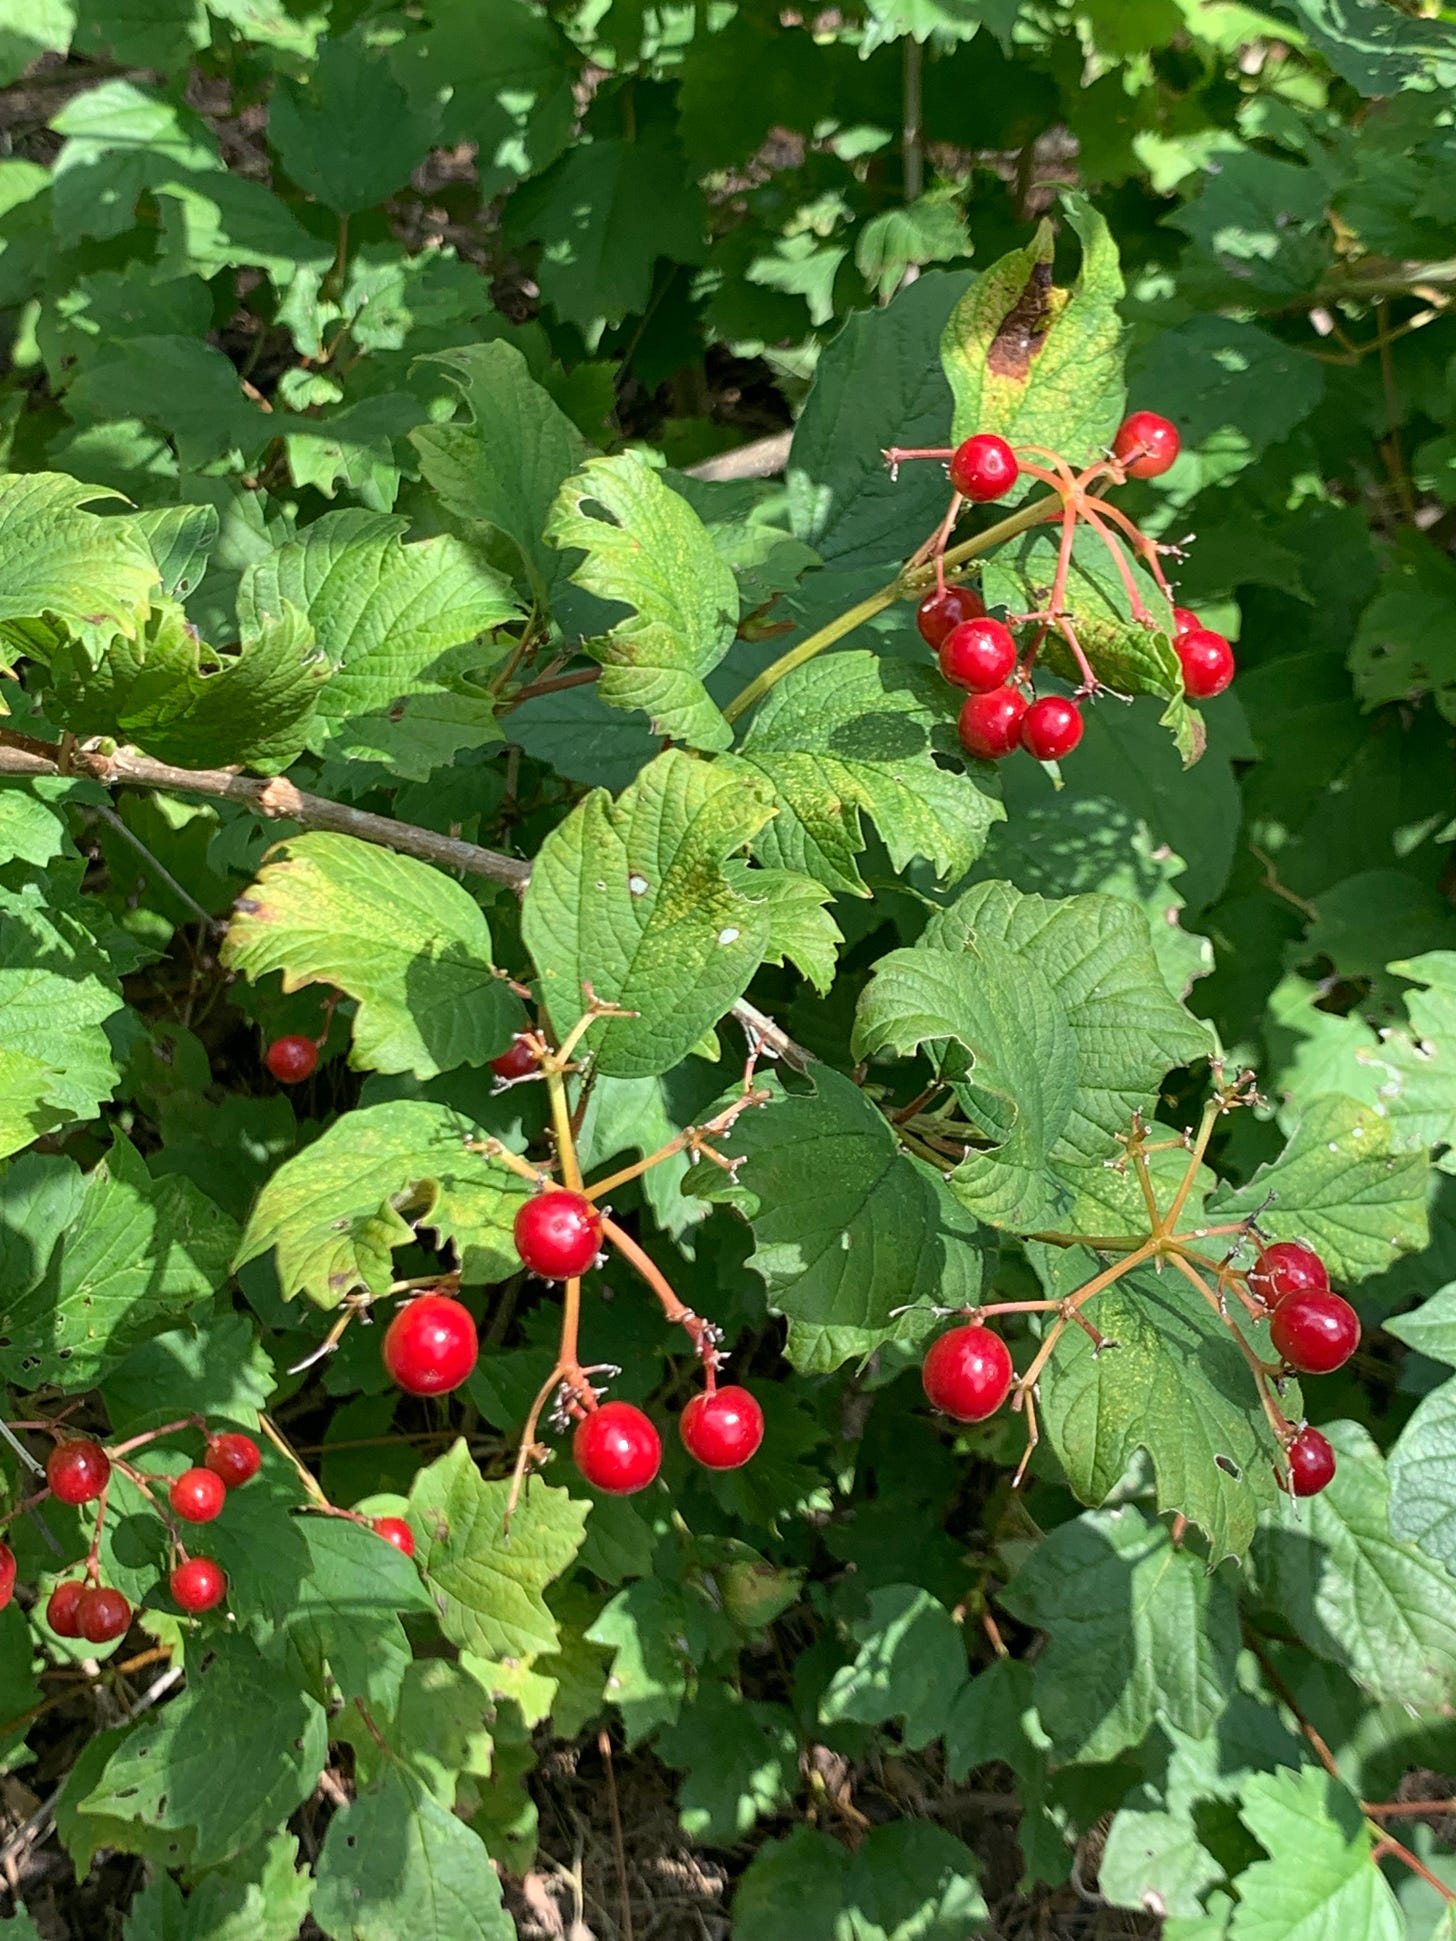 Intense green leaves with small groups of bright red berries.